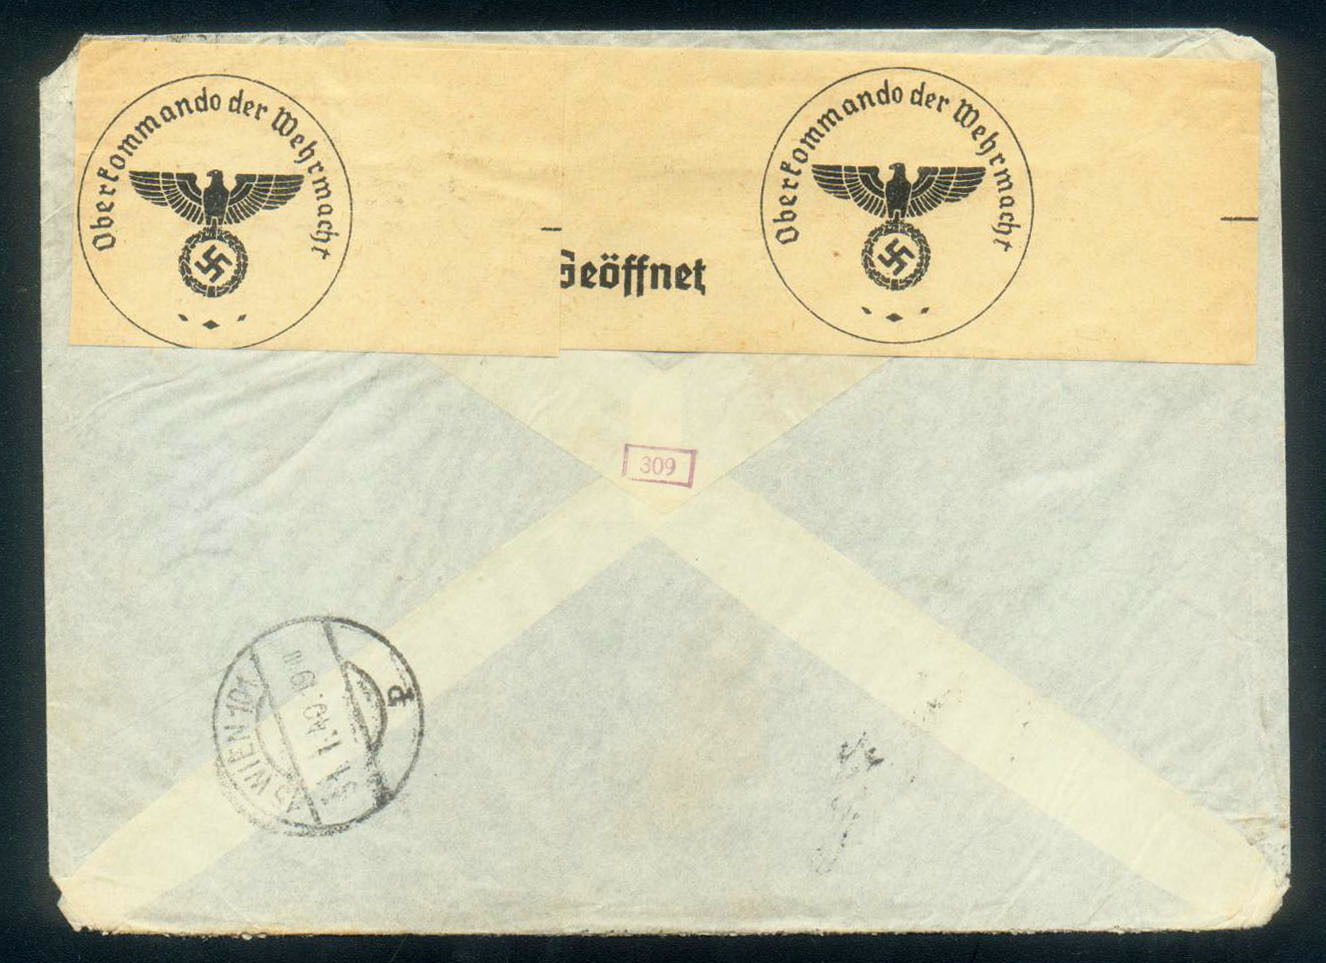 1940 VIENNA COVER with NAZI CENSOR STRIP to the JEWISH DAILY FORWARD in NEW YORK